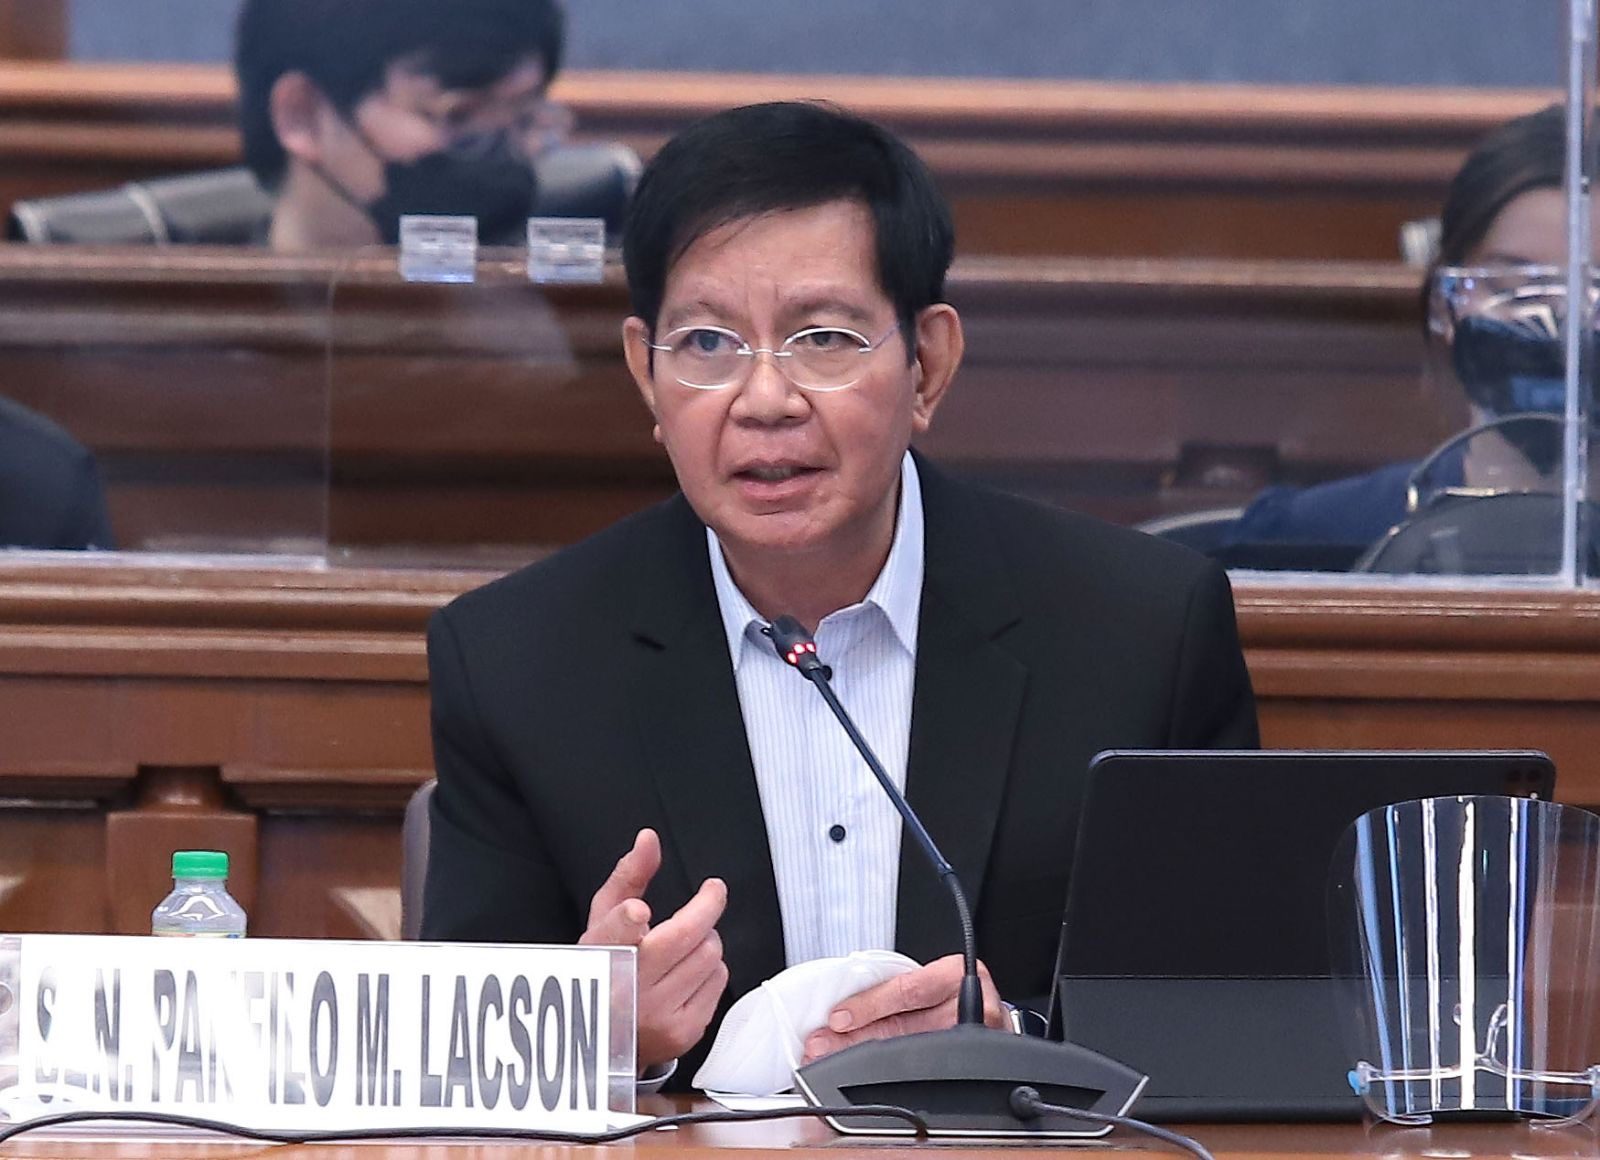 Lacson’s support for NTF-ELCAC wanes as Parlade stays on as spokesman